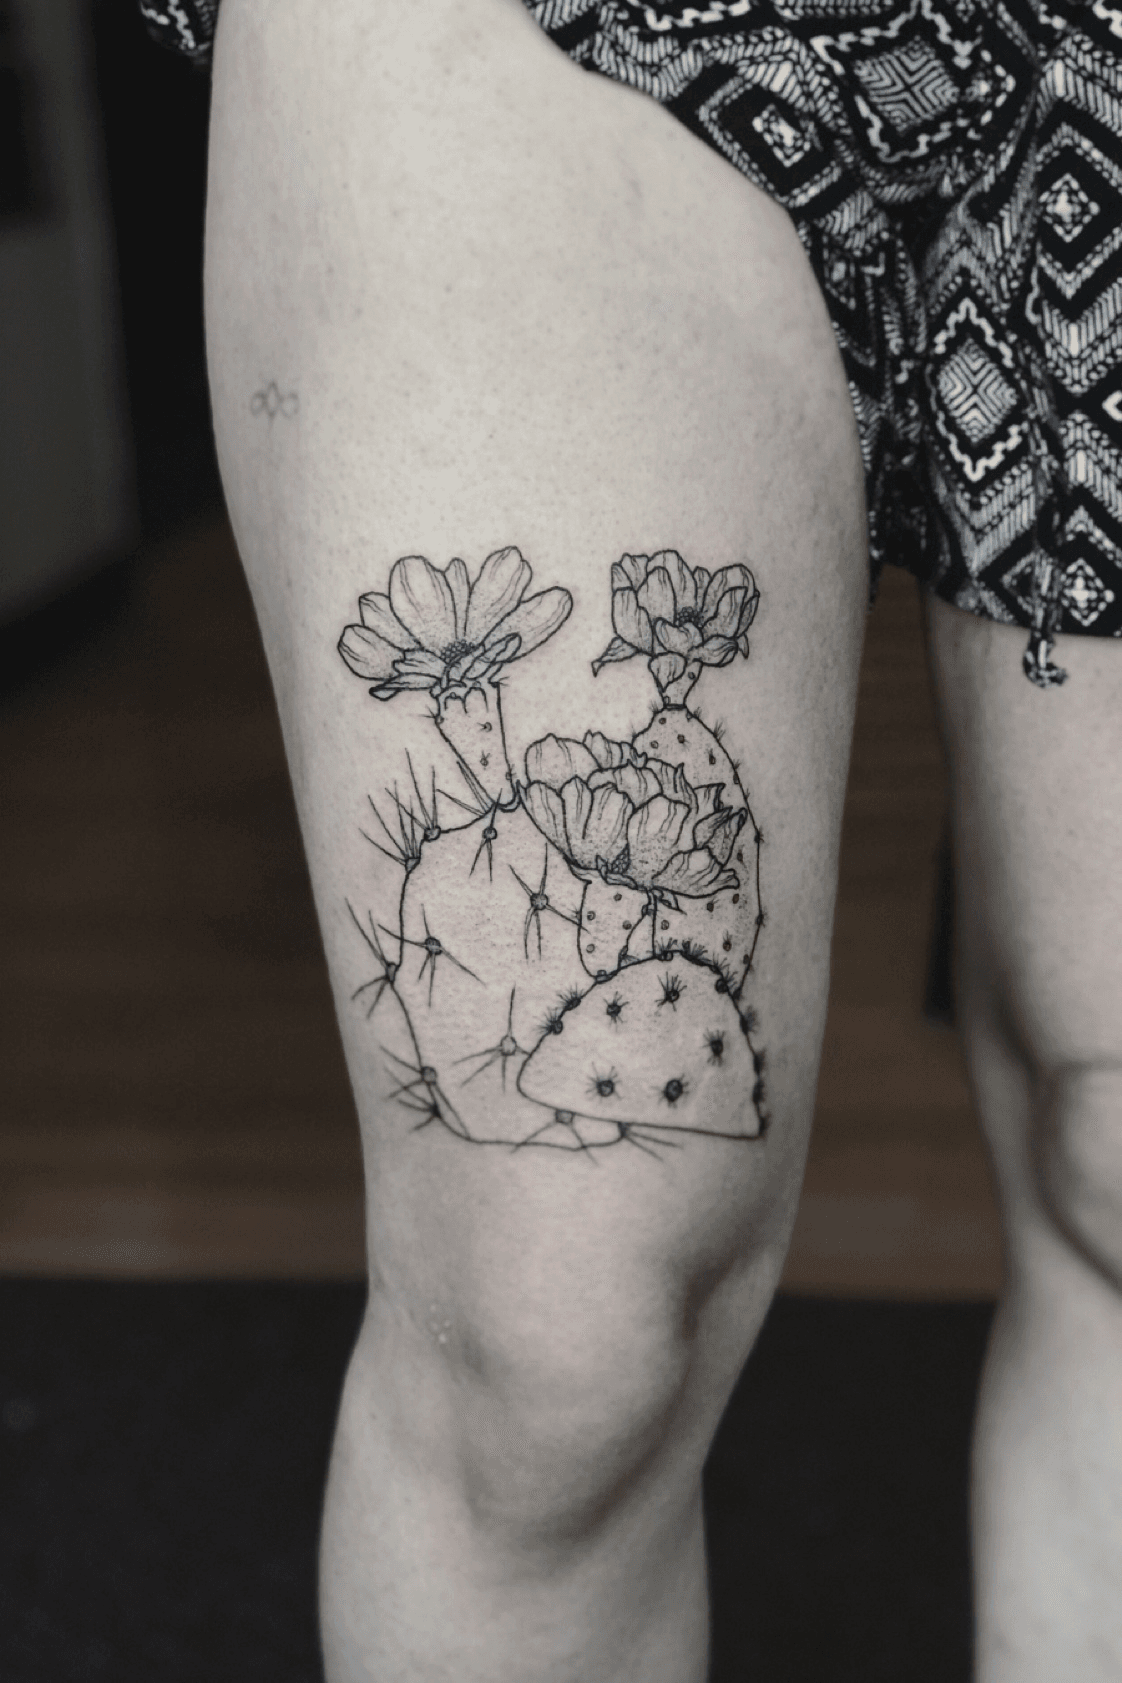 Prickly pear cactus  I loveeee doing anything desert related      fortcollinstattoo fortcollinstattooartist coloradotattoo  Instagram